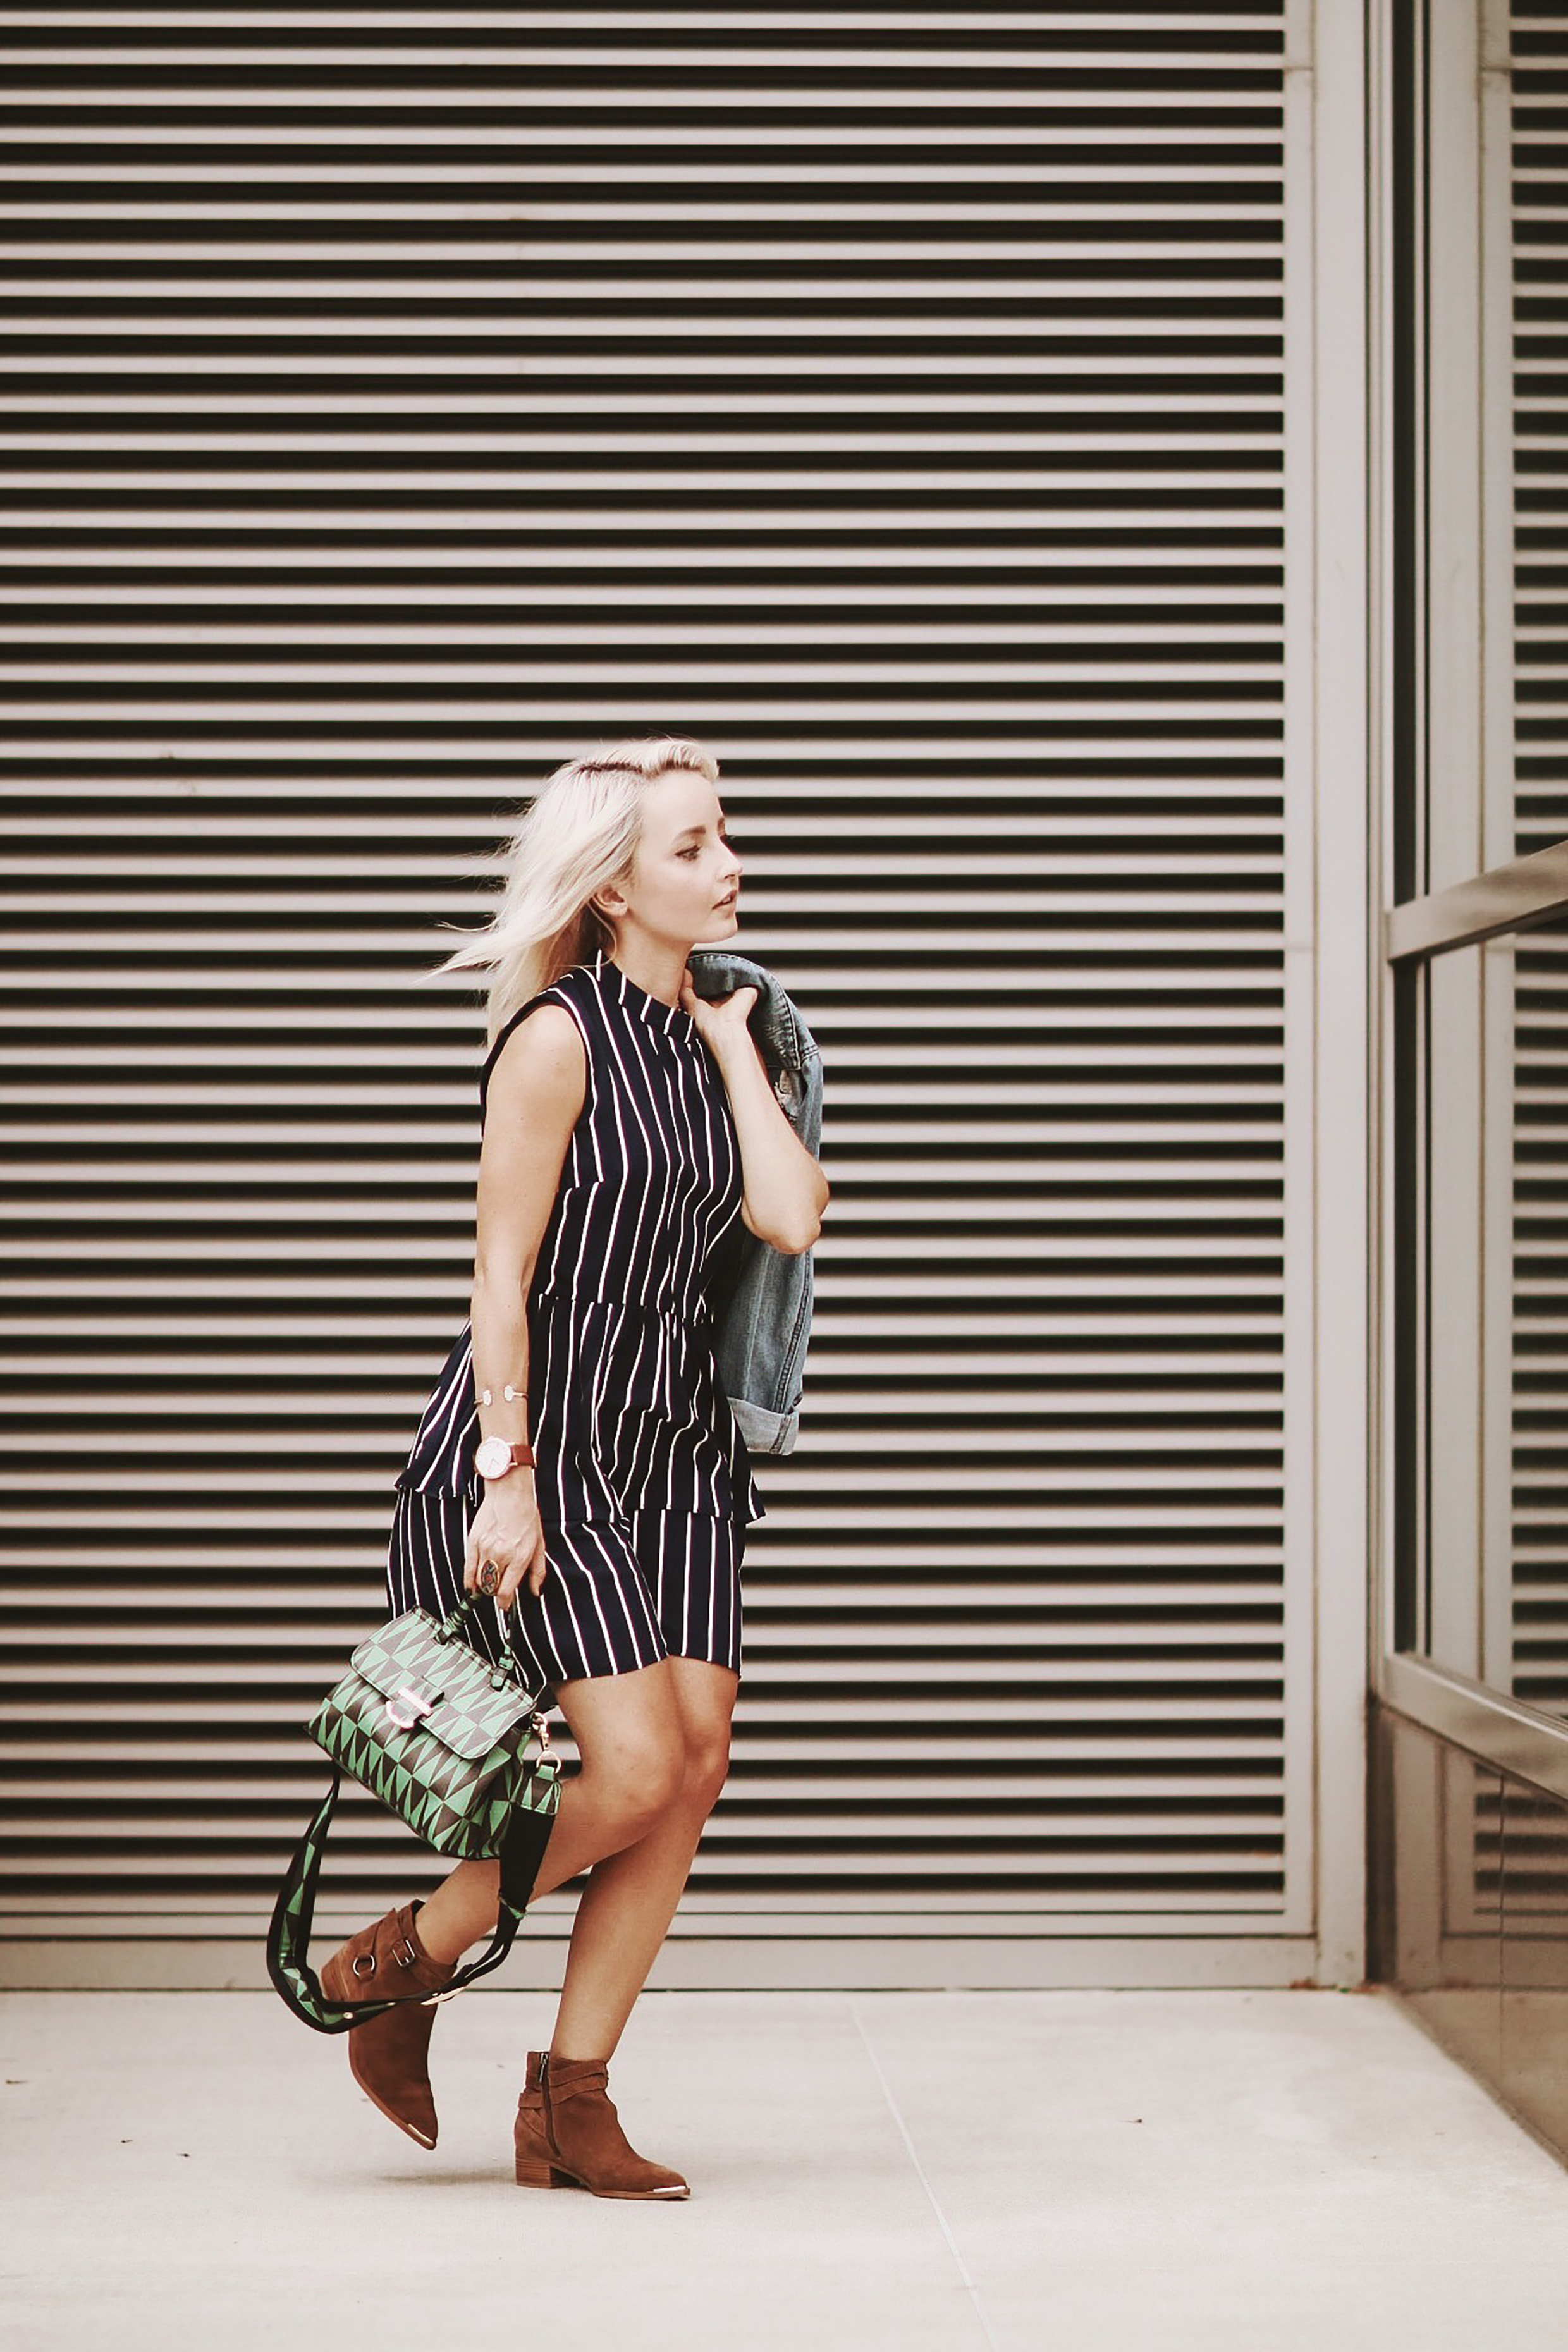 TRANSITIONING YOUR SUMMER DRESSES TO FALL